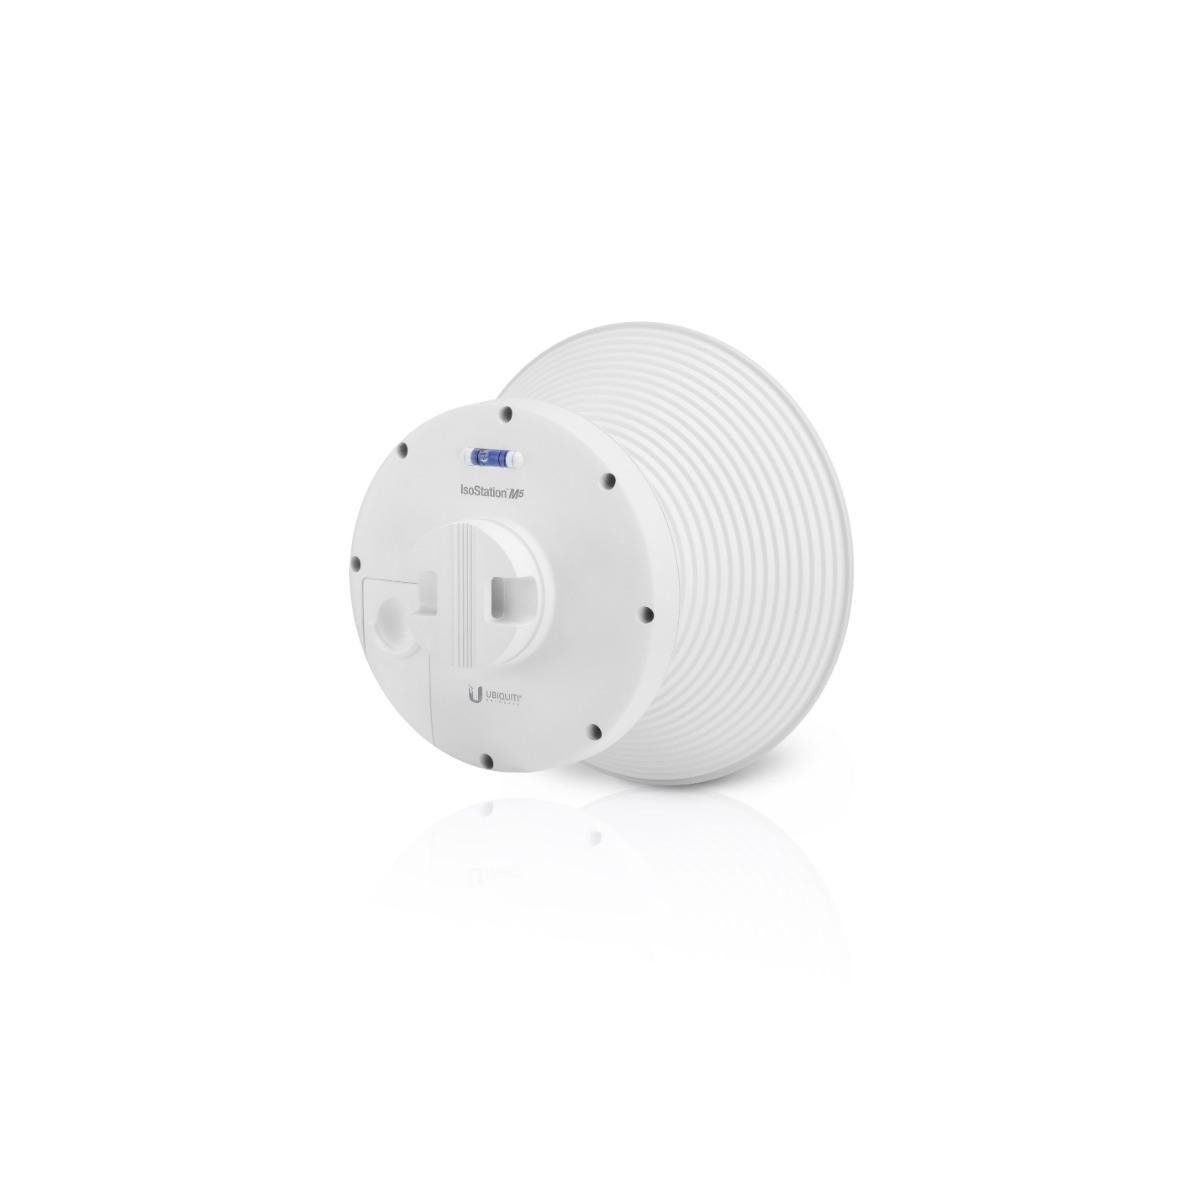 Ubiquiti Networks IS-M5 - 5 dBi... GHz CPE 14 WLAN-Access Point airMAX Funkmodul, IsoStation